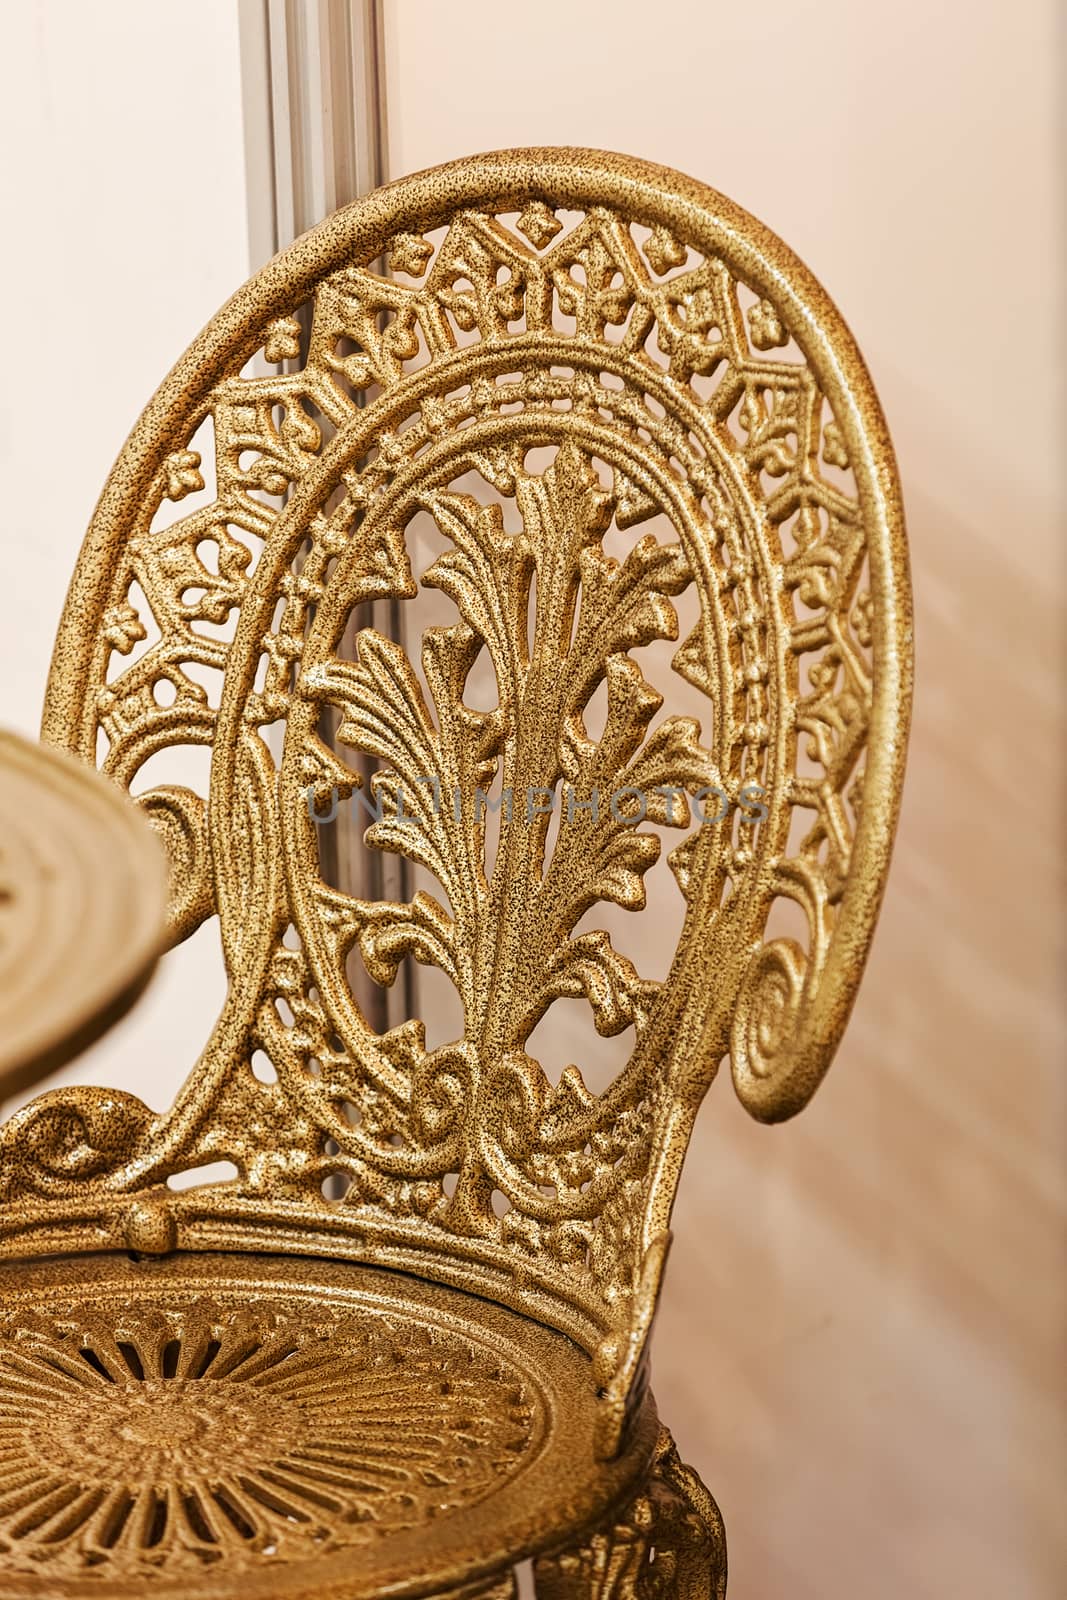 chair made of wrought iron with gold color, note shallow depth of field